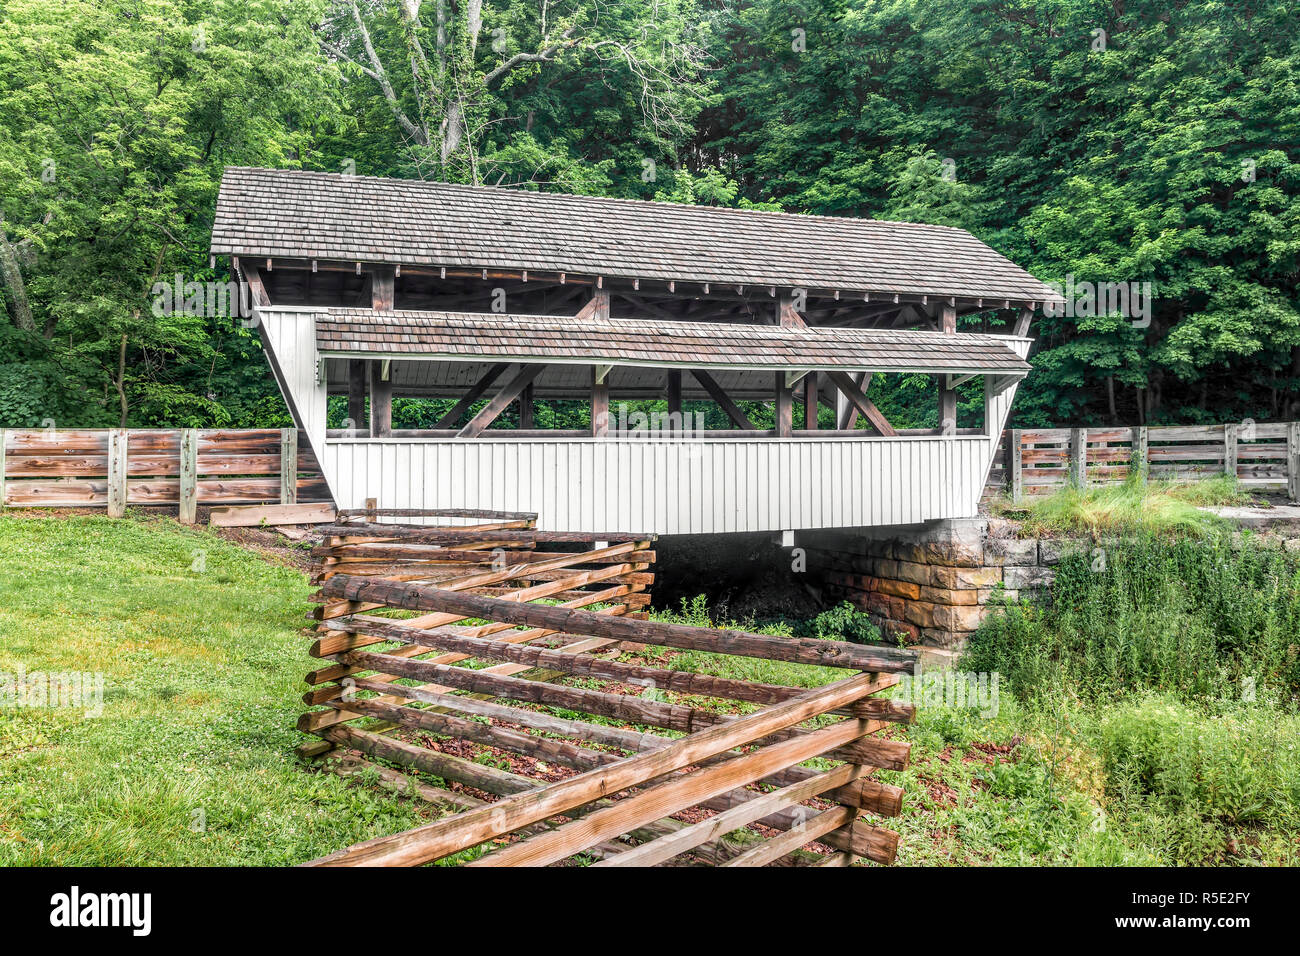 Built in 1901, Rock Mill Covered Bridge crosses the headwaters of the Hocking River in Fairfield County near Lancaster, Ohio Stock Photo